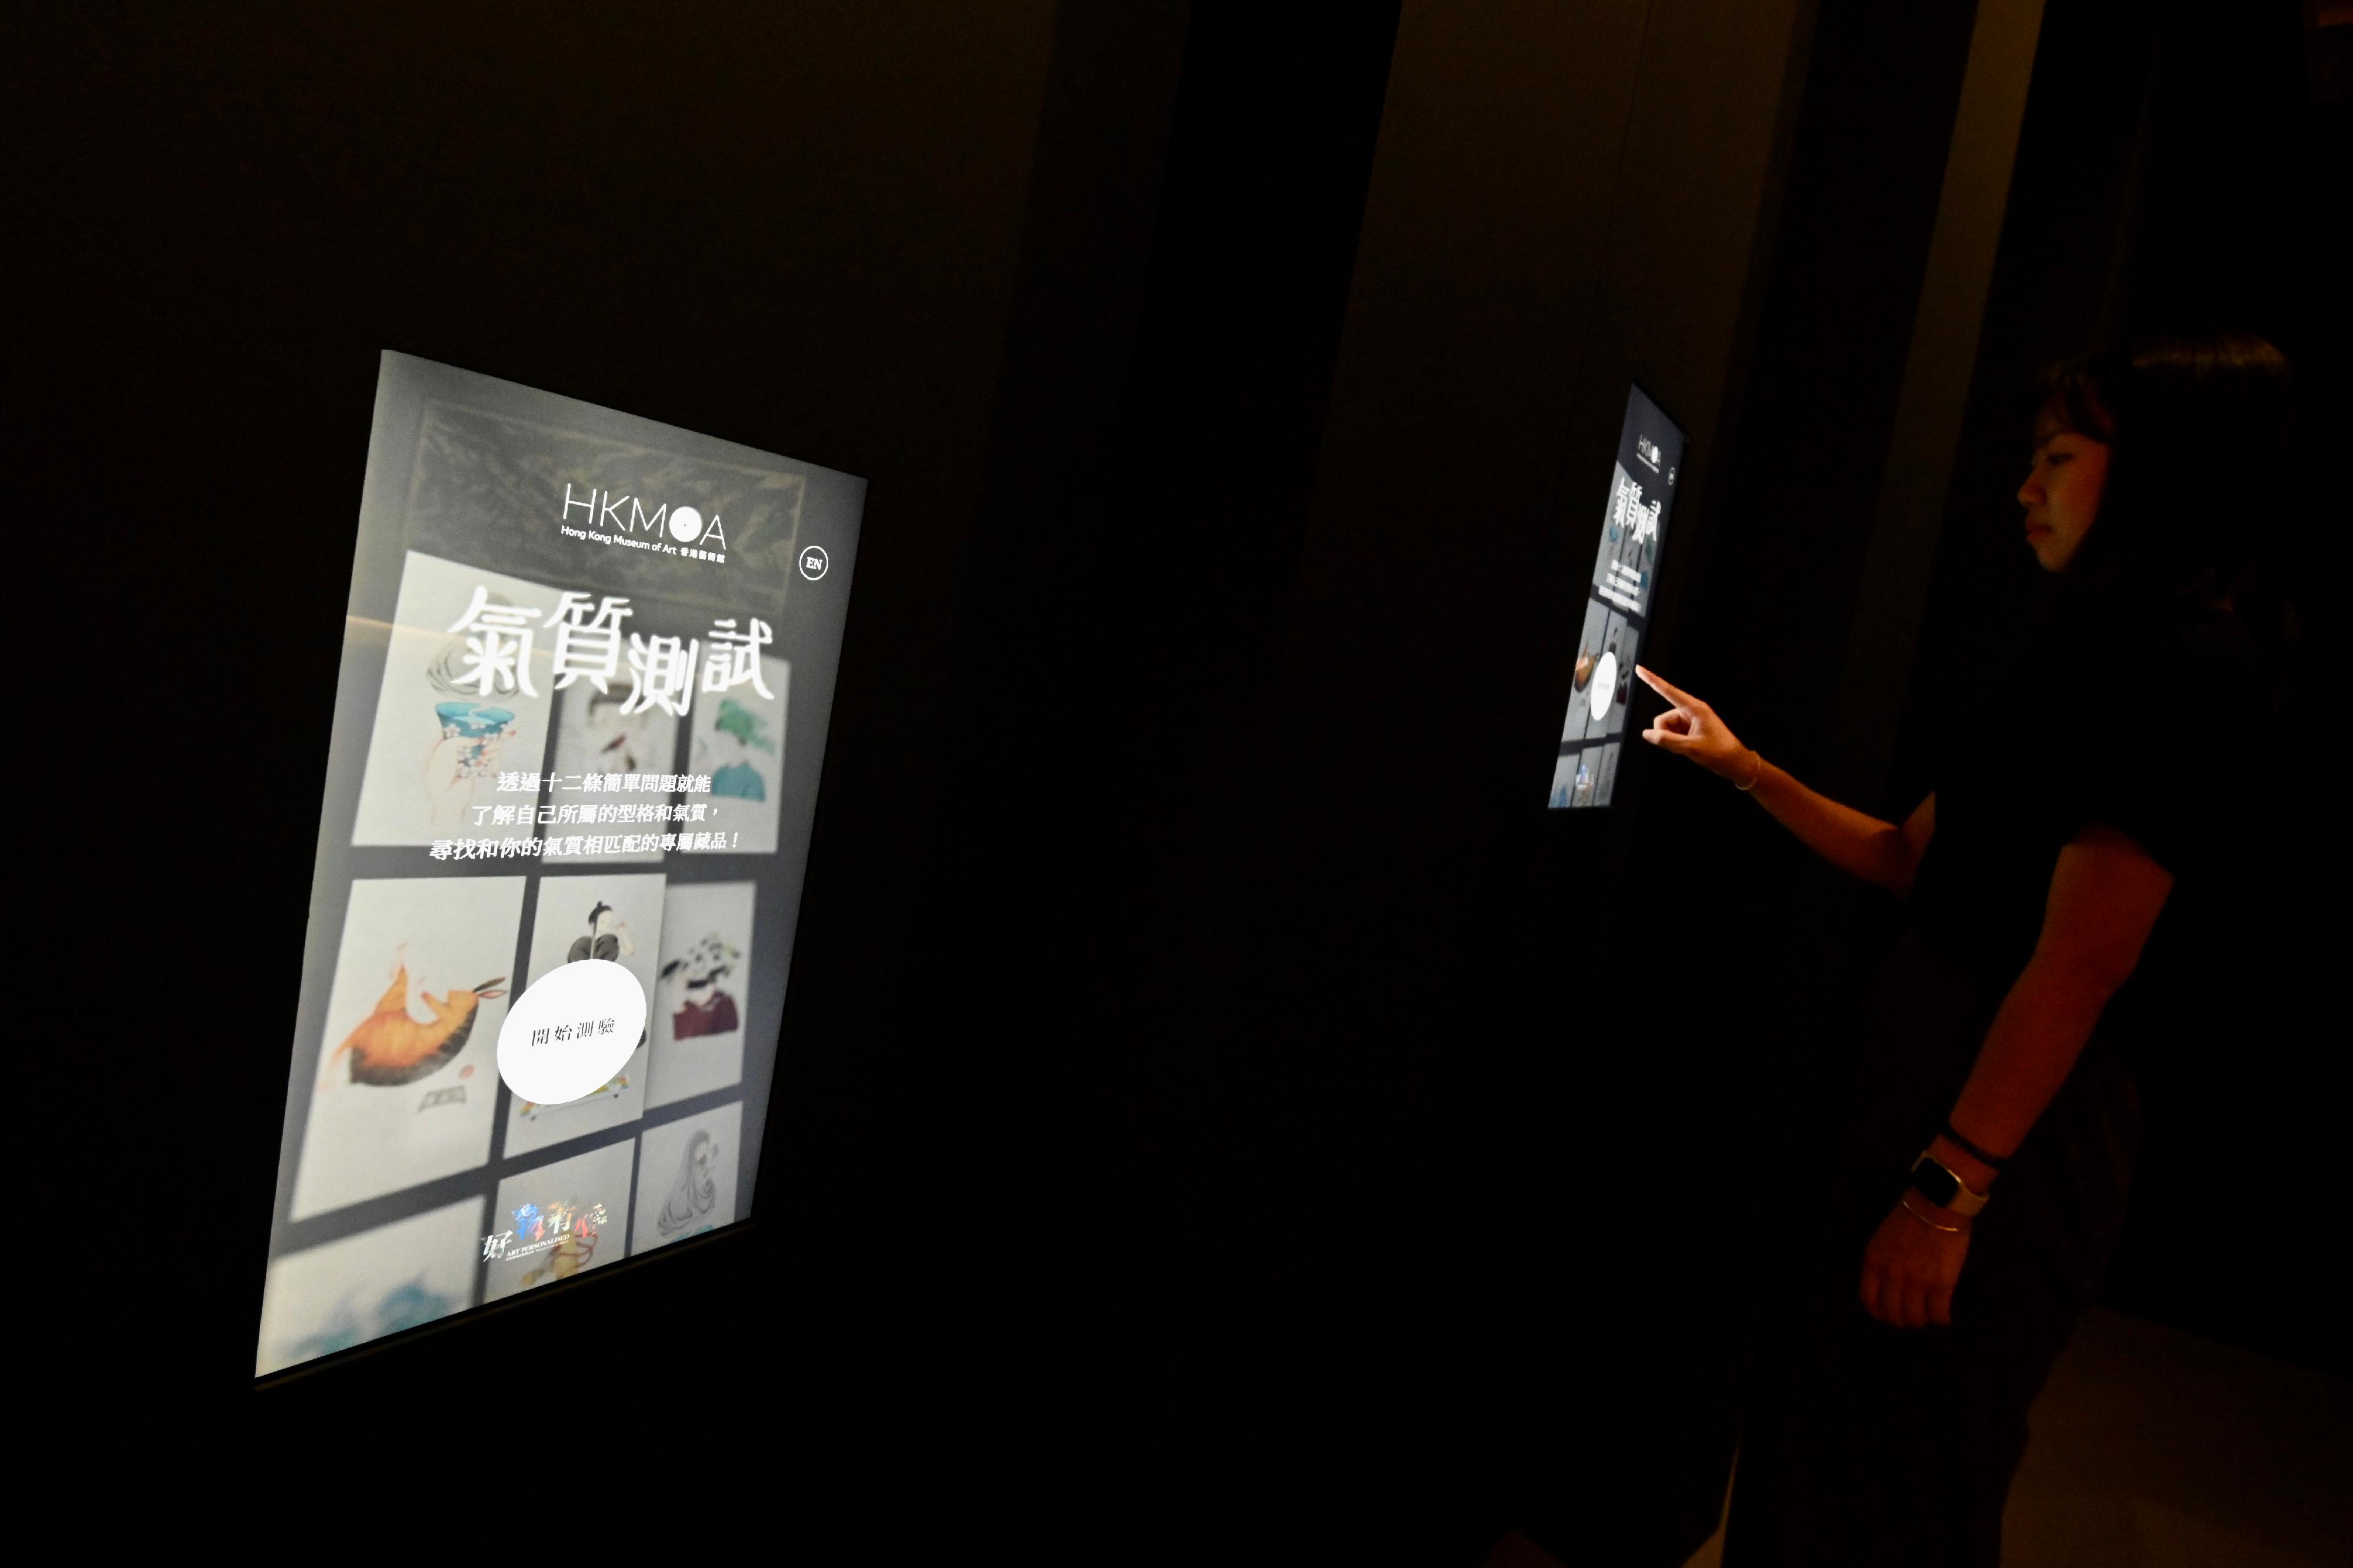 "Art Personalised: Masterpieces from the Hong Kong Museum of Art" exhibition will be held at the Hong Kong Museum of Art from tomorrow (June 30). Visitors are encouraged to take a personality test to find out their personality types and look for their "recommended artworks" on display in four different exhibition zones.
